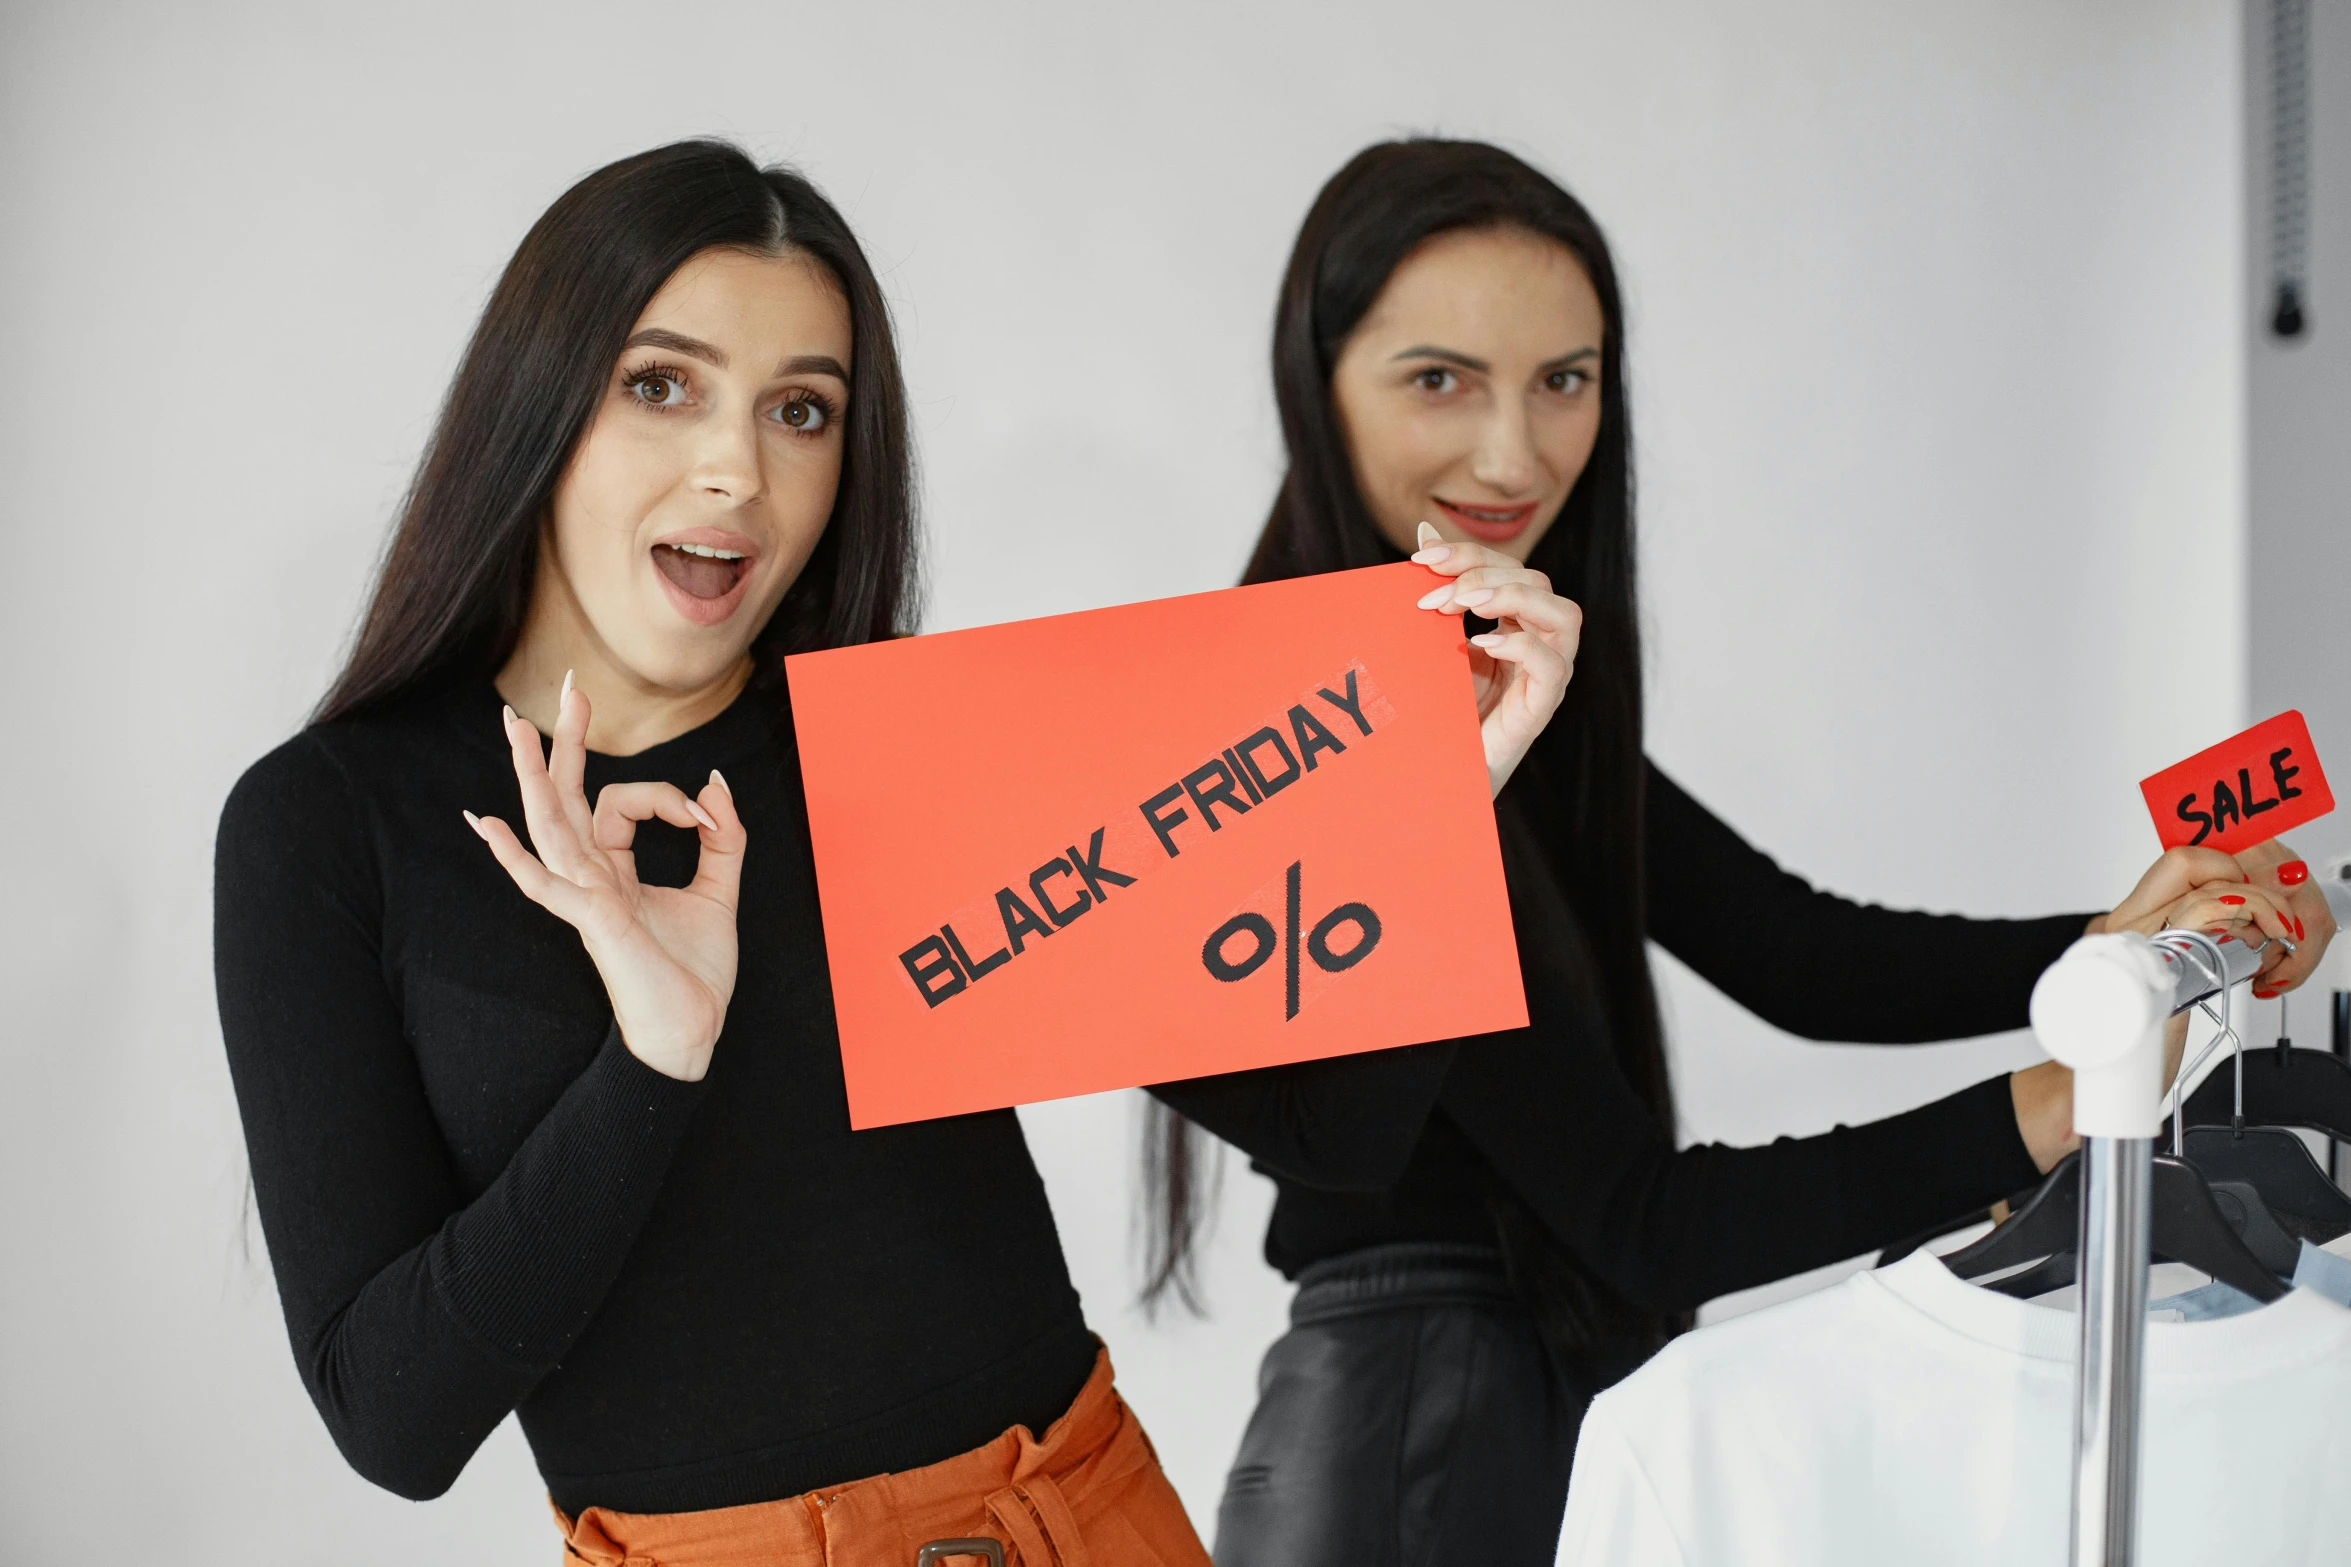 two women in black and red outfits holding a sign